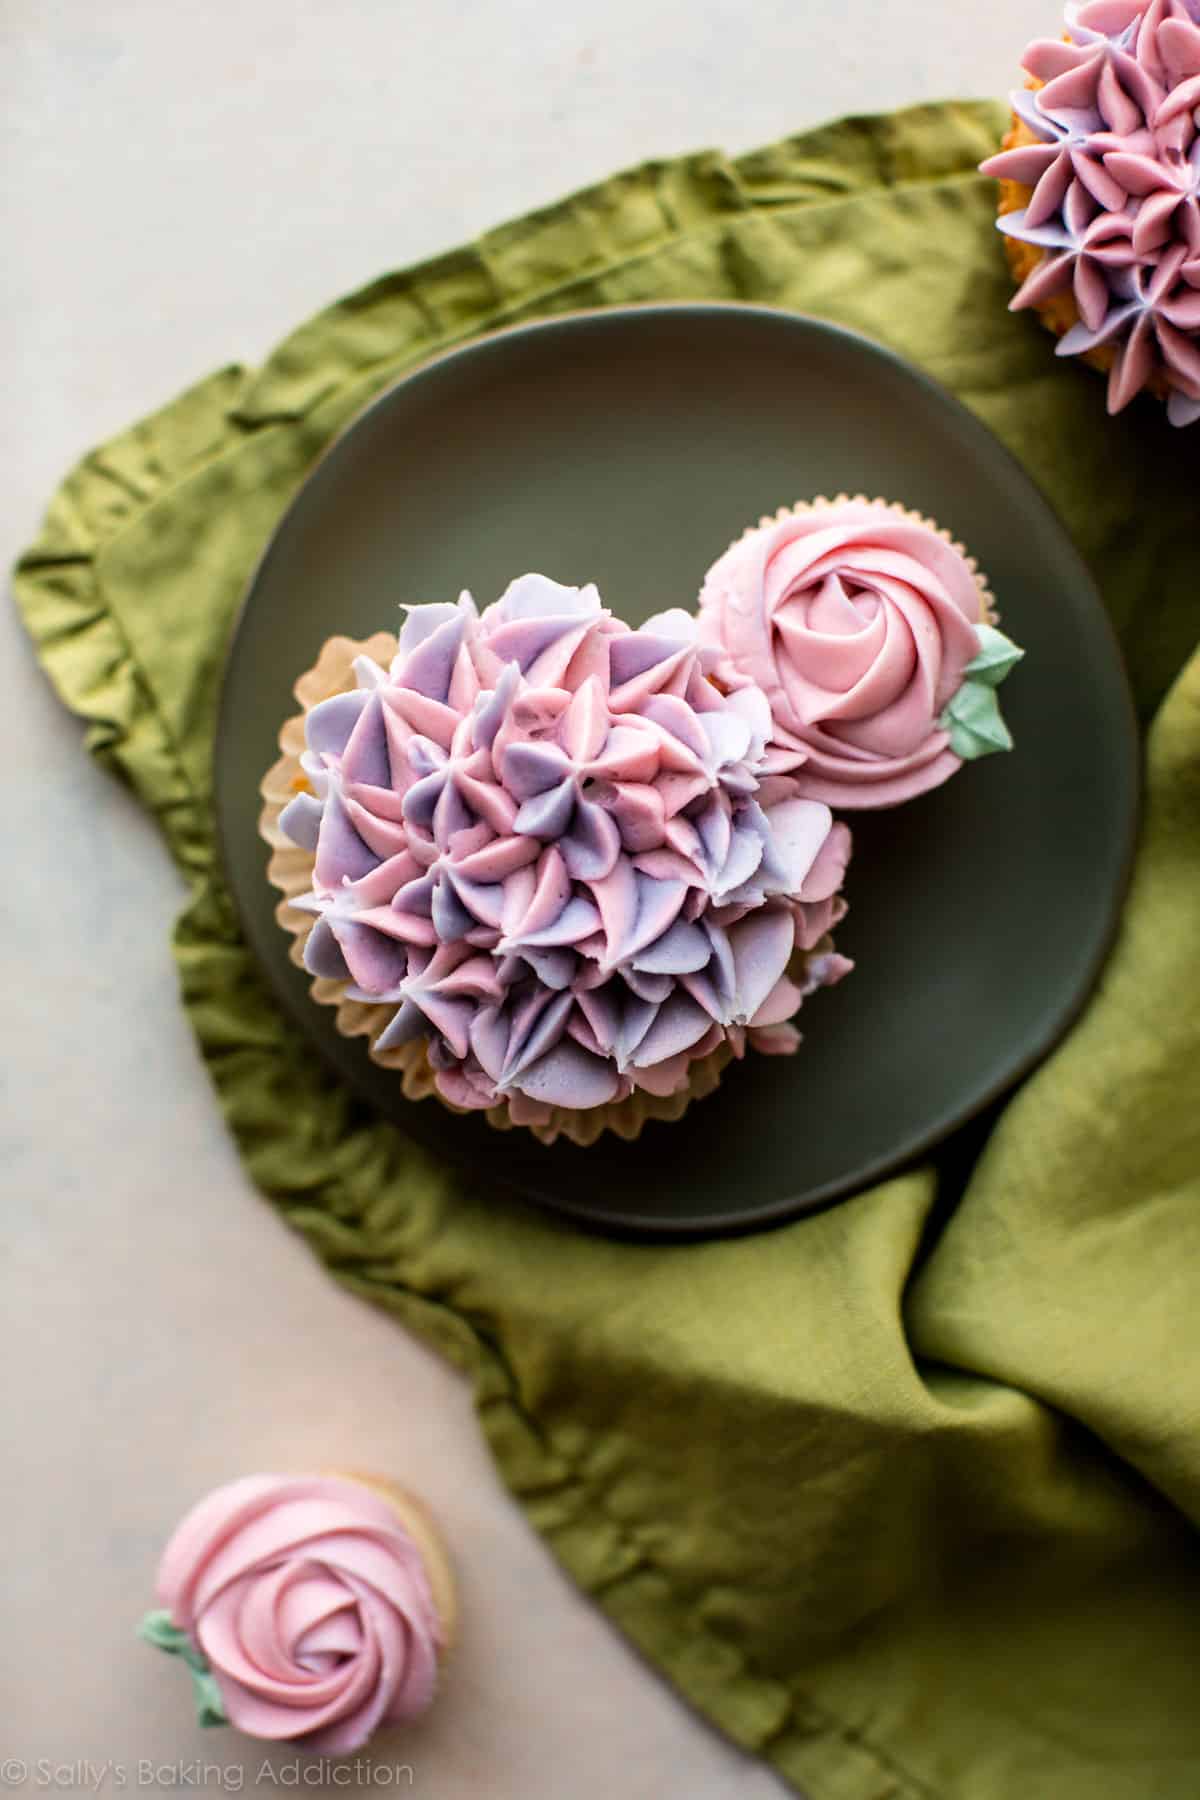 cupcakes decorated with buttercream like hydrangea and roses on a green plate